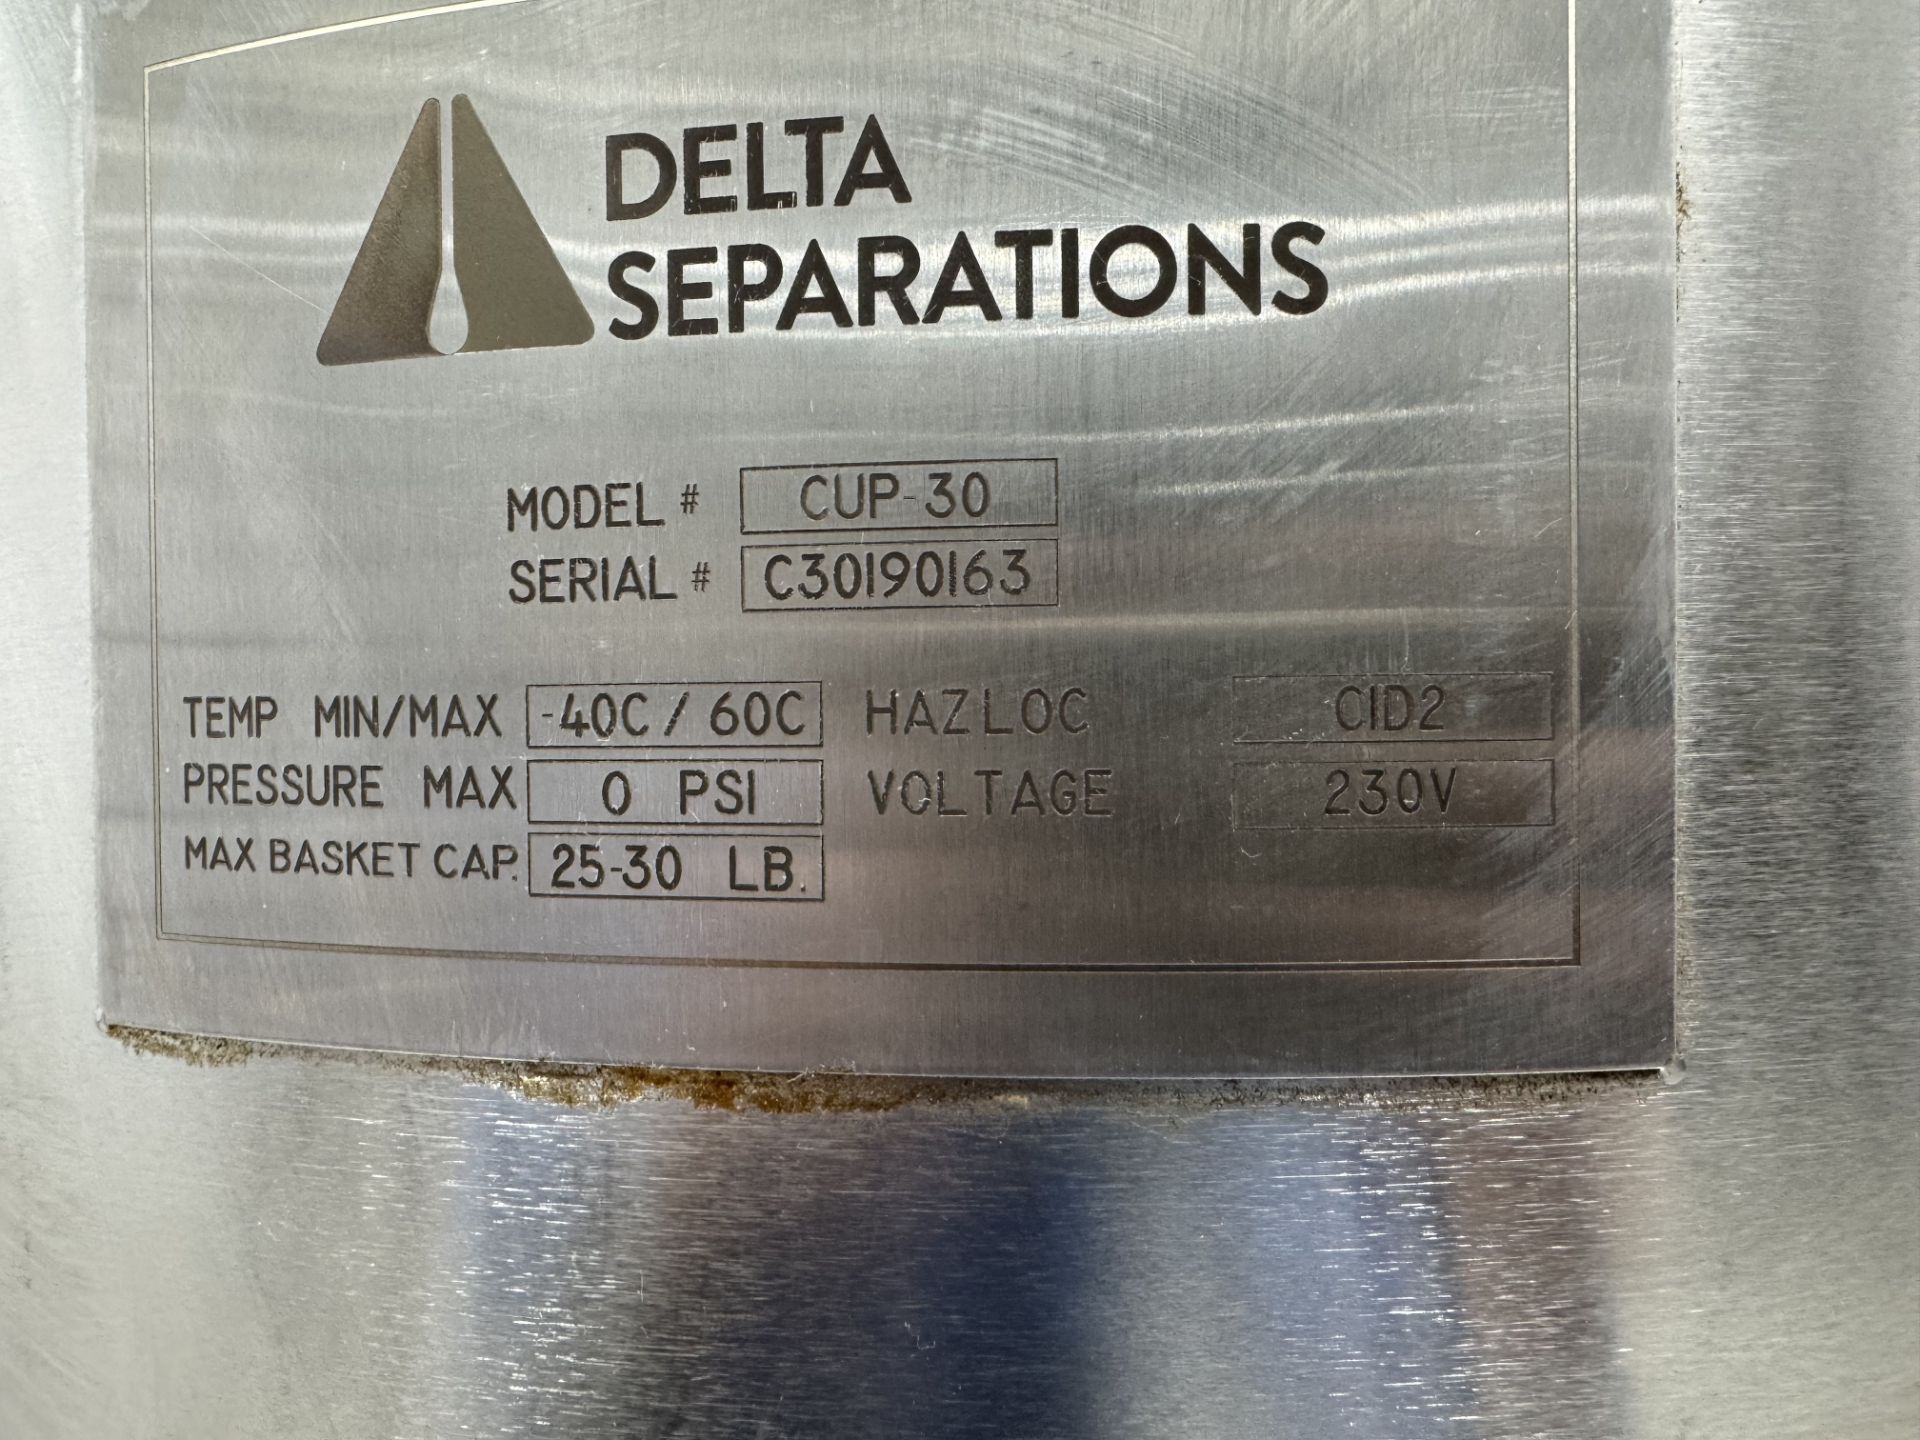 Used Dual Delta Separations CUP 30 Extraction System. w/ (2) CUP 30s, Tanks, & PermaCool Controls. - Image 4 of 42